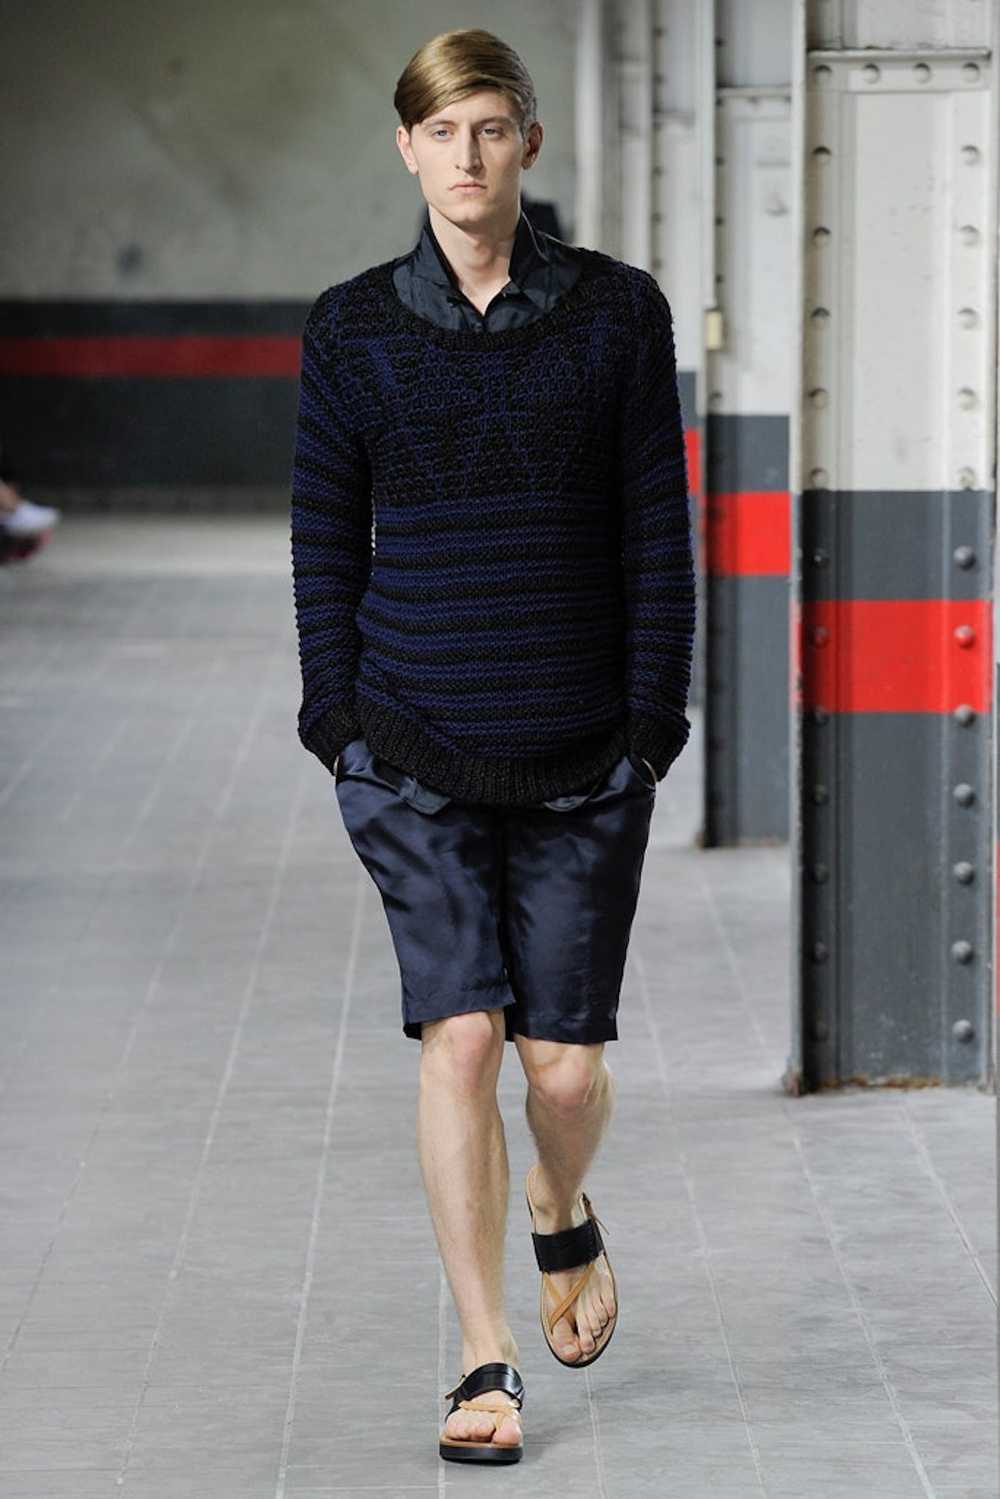 Dries Van Noten SS12 linen and rayon sweater - image 4